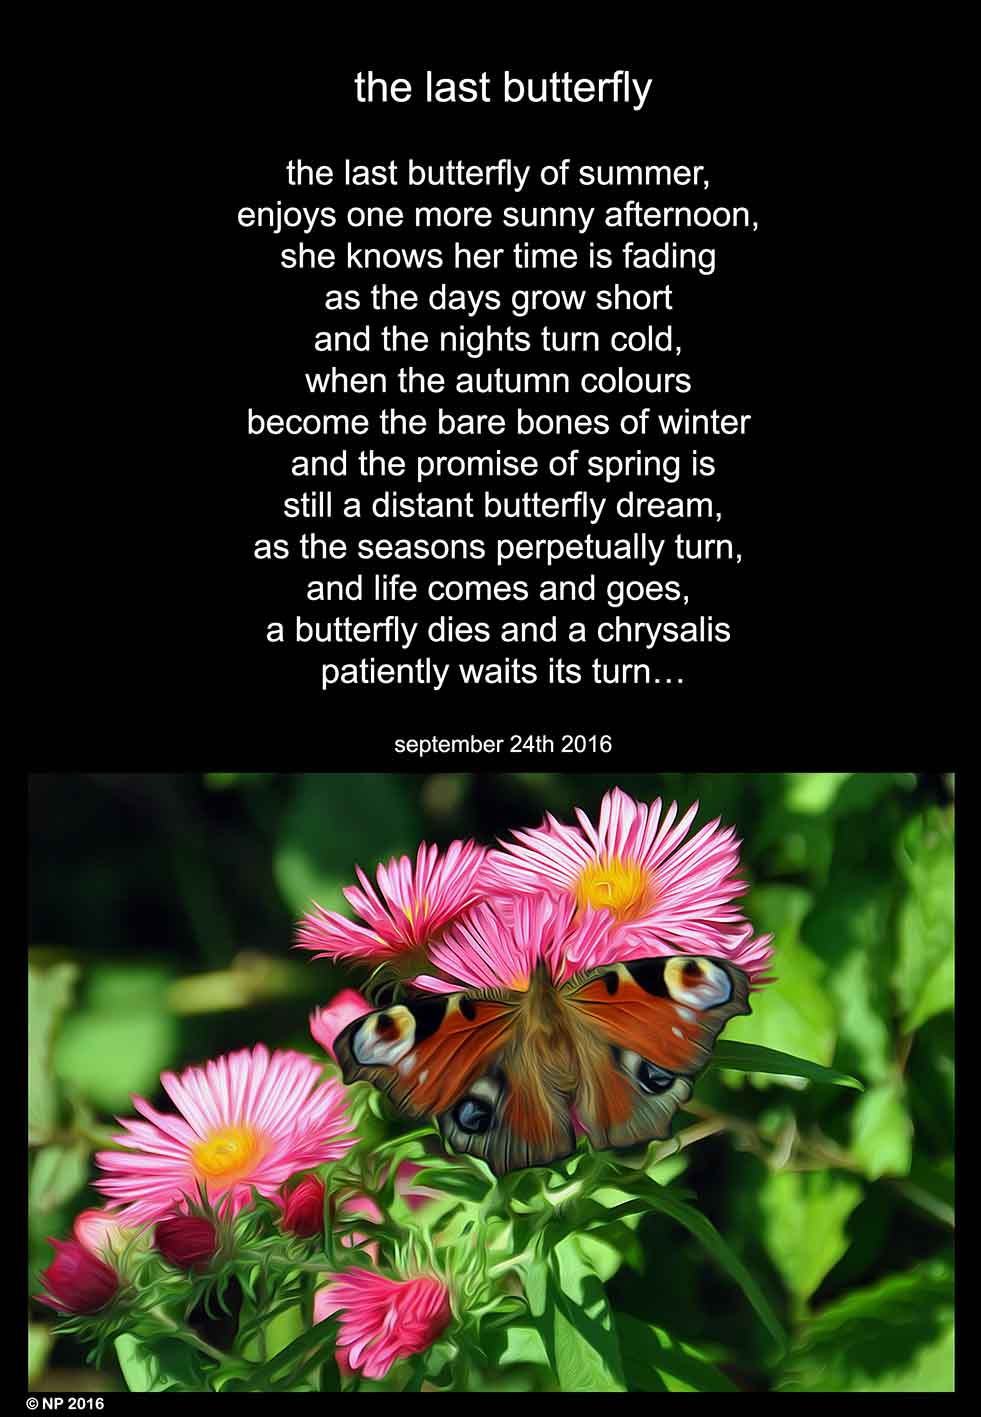 000-the-last-butterfly